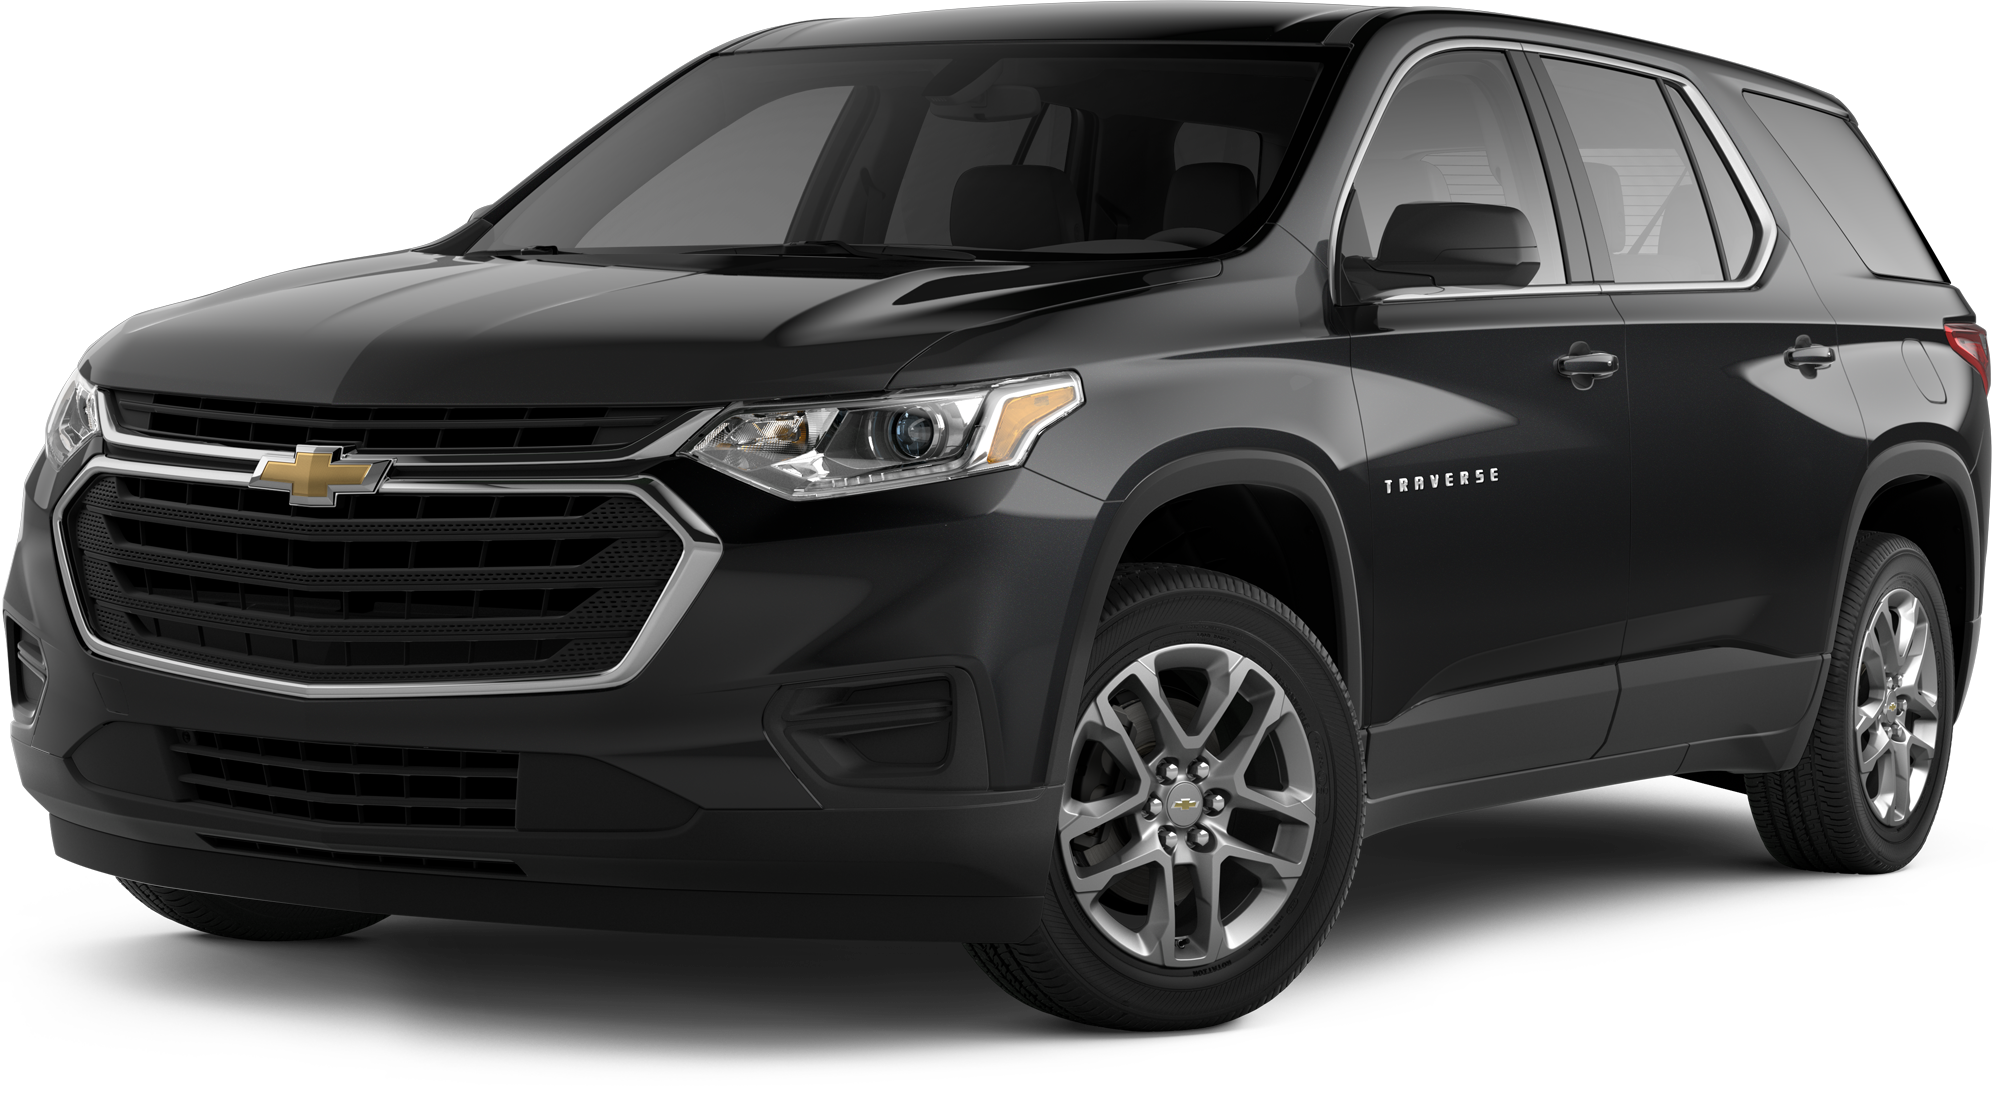 2020-chevrolet-traverse-incentives-specials-offers-in-orchard-park-ny